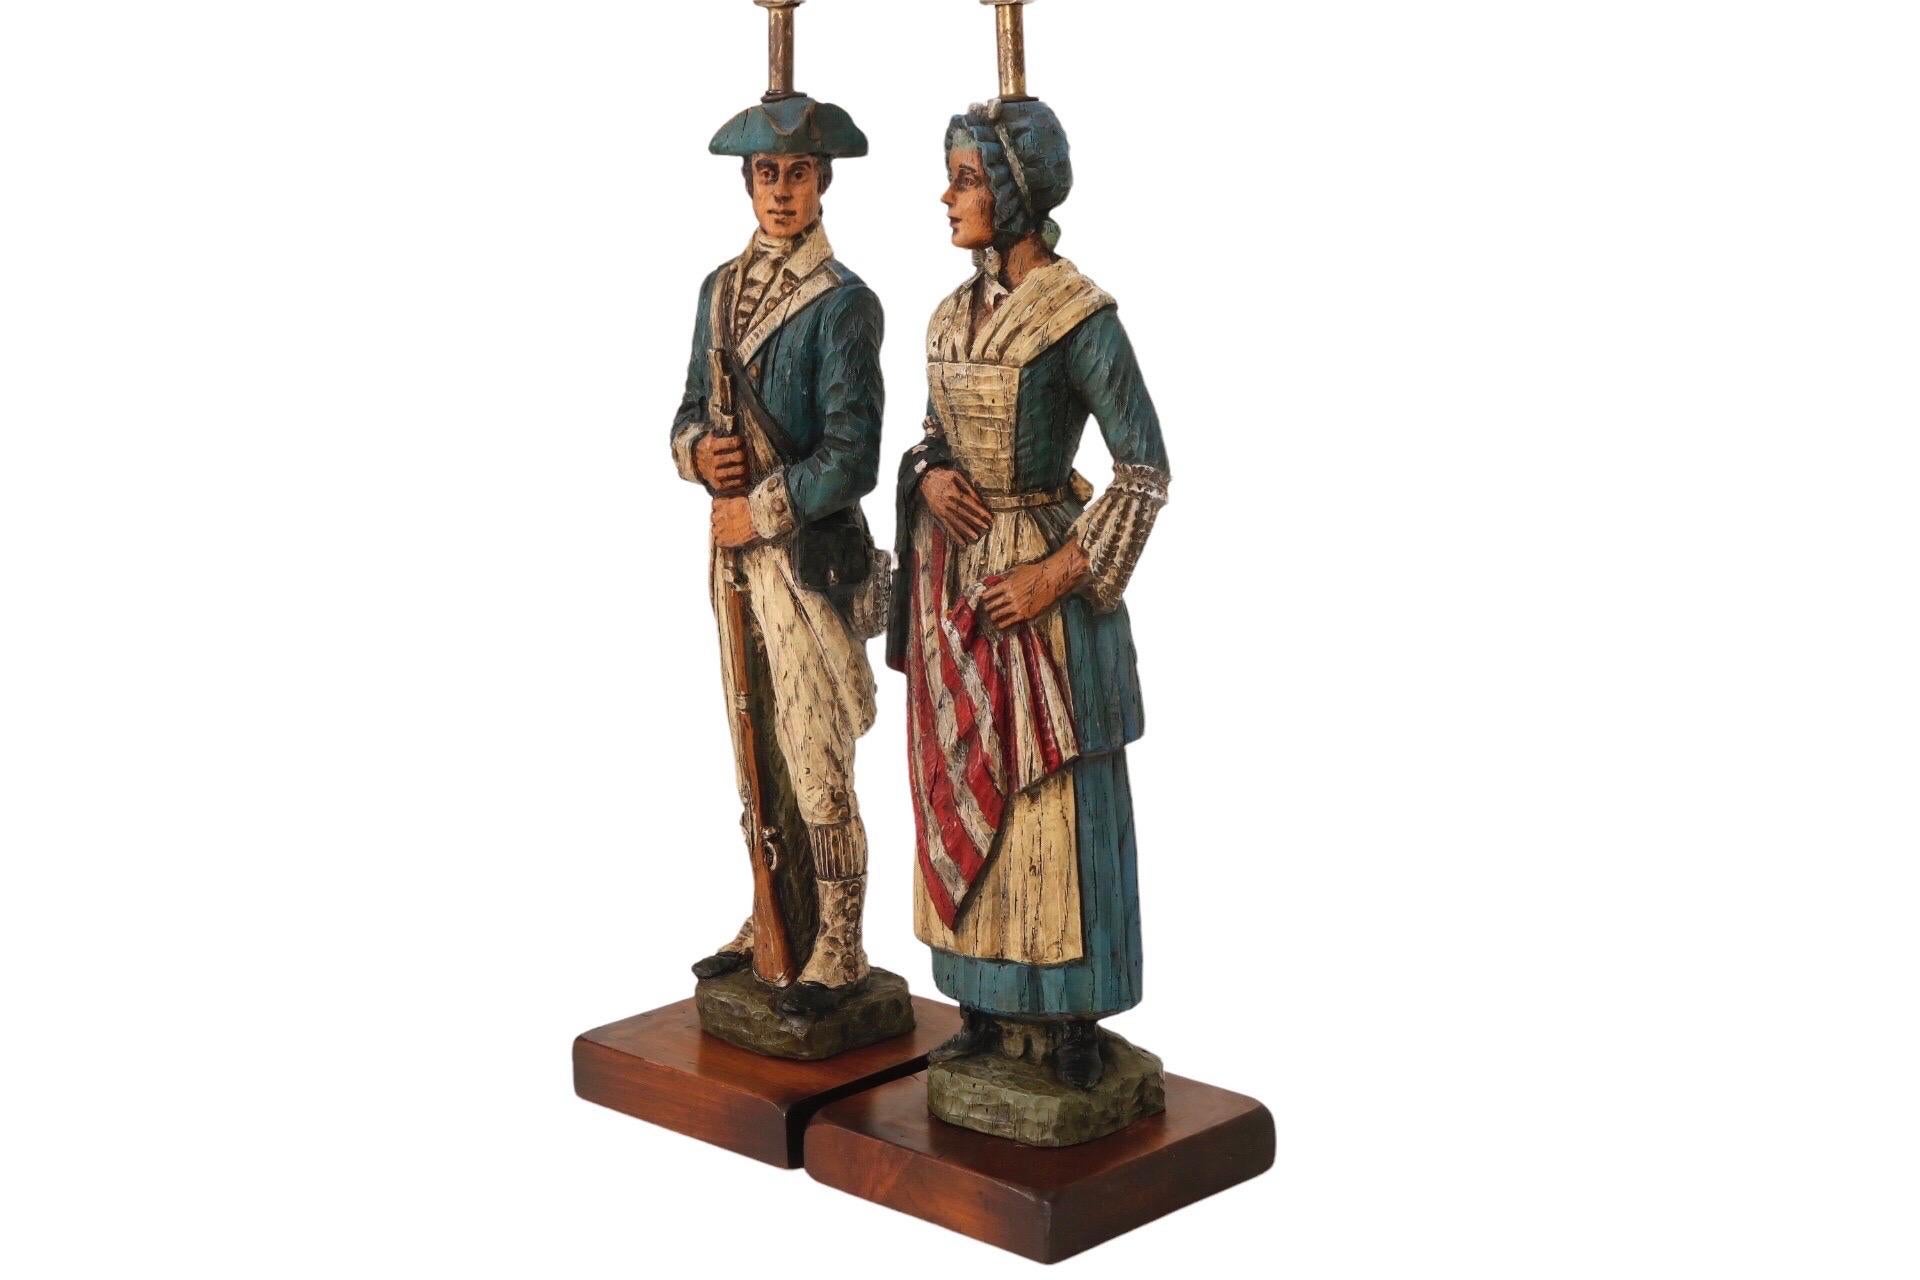 A set of two commemorative Bicentennial wooden table lamps made by Dunning Industries Incorporated. Carved figures in Revolutionary dress are Betsy Ross, the American upholsterer accredited with designing the first American flag, and a Minuteman in